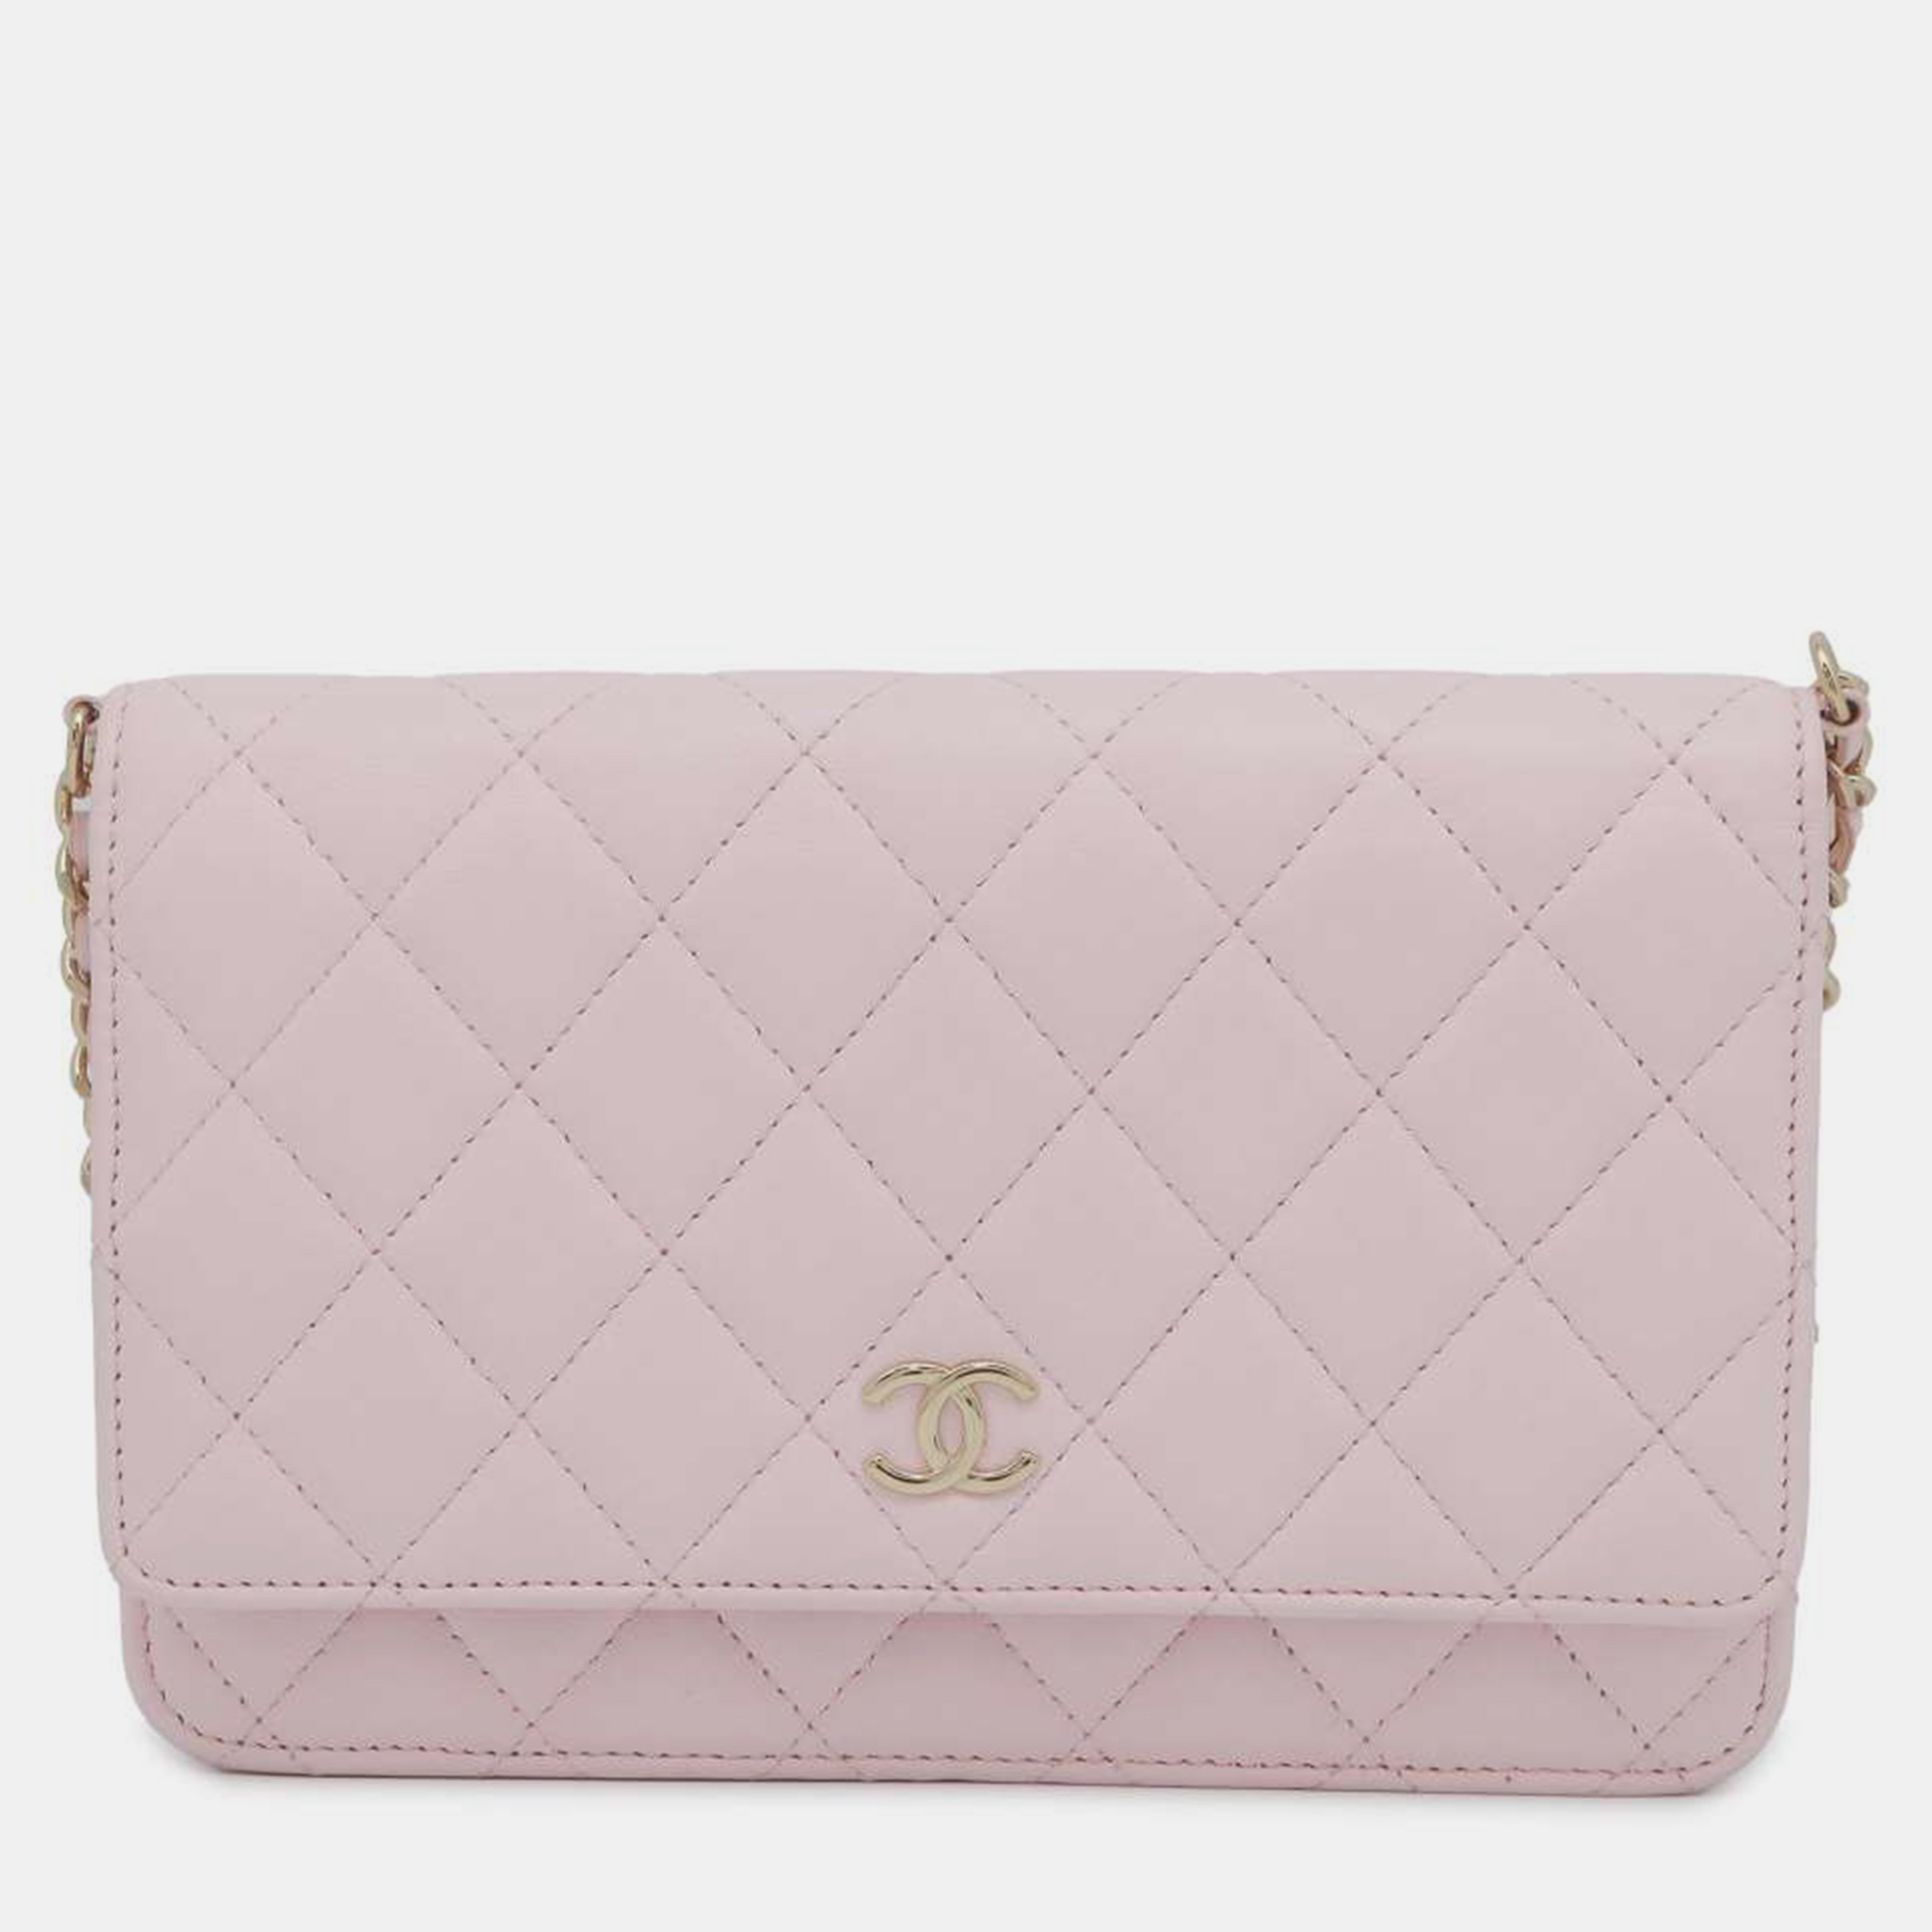 Chanel pink pearl chain wallet on chain